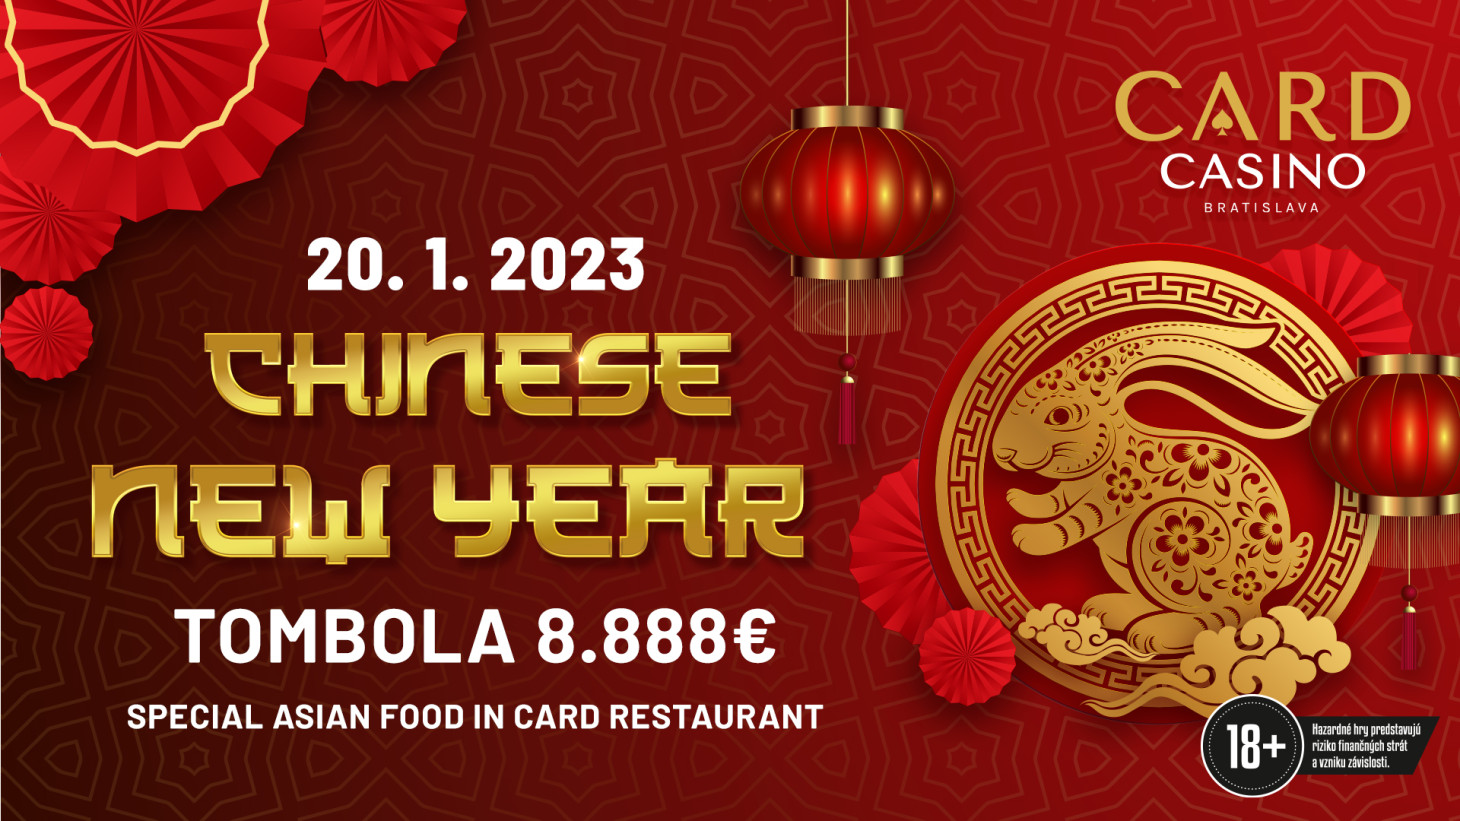 Come celebrate the Chinese New Year of the Rabbit with a fabulous raffle for 8.888€